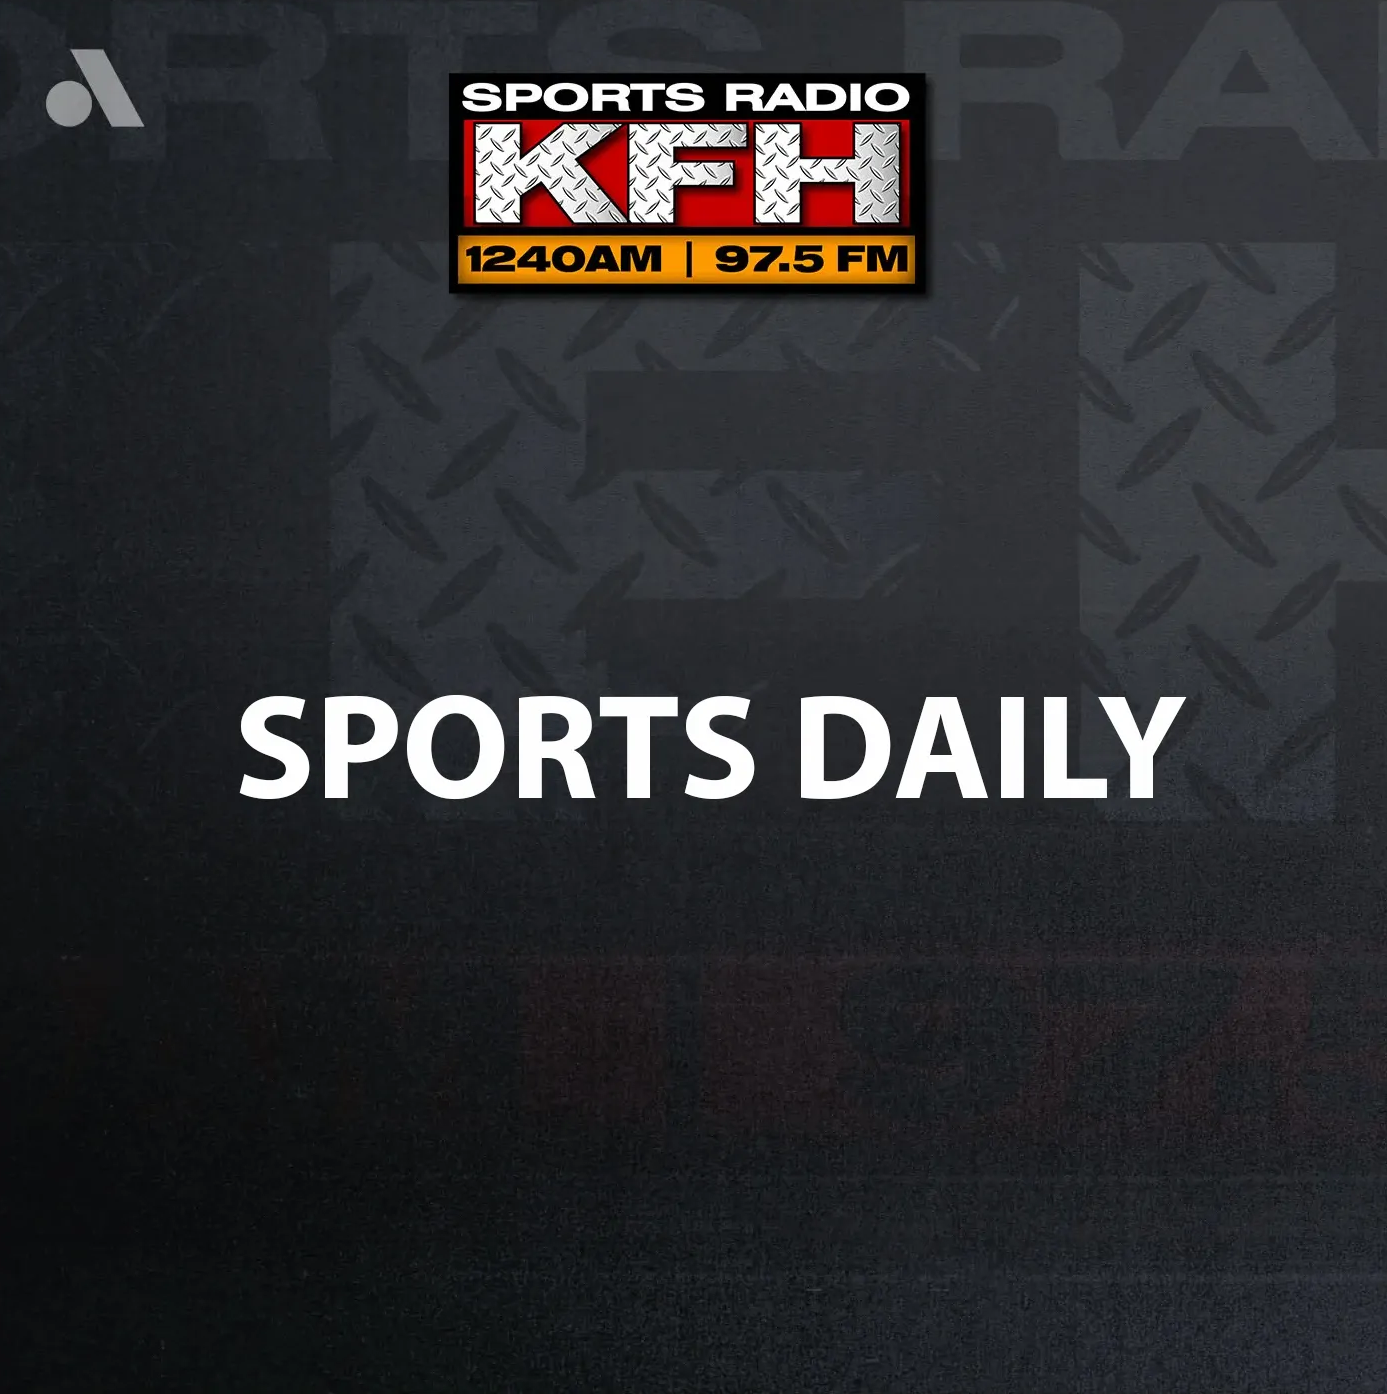 This weekend's football picks on Sports Daily